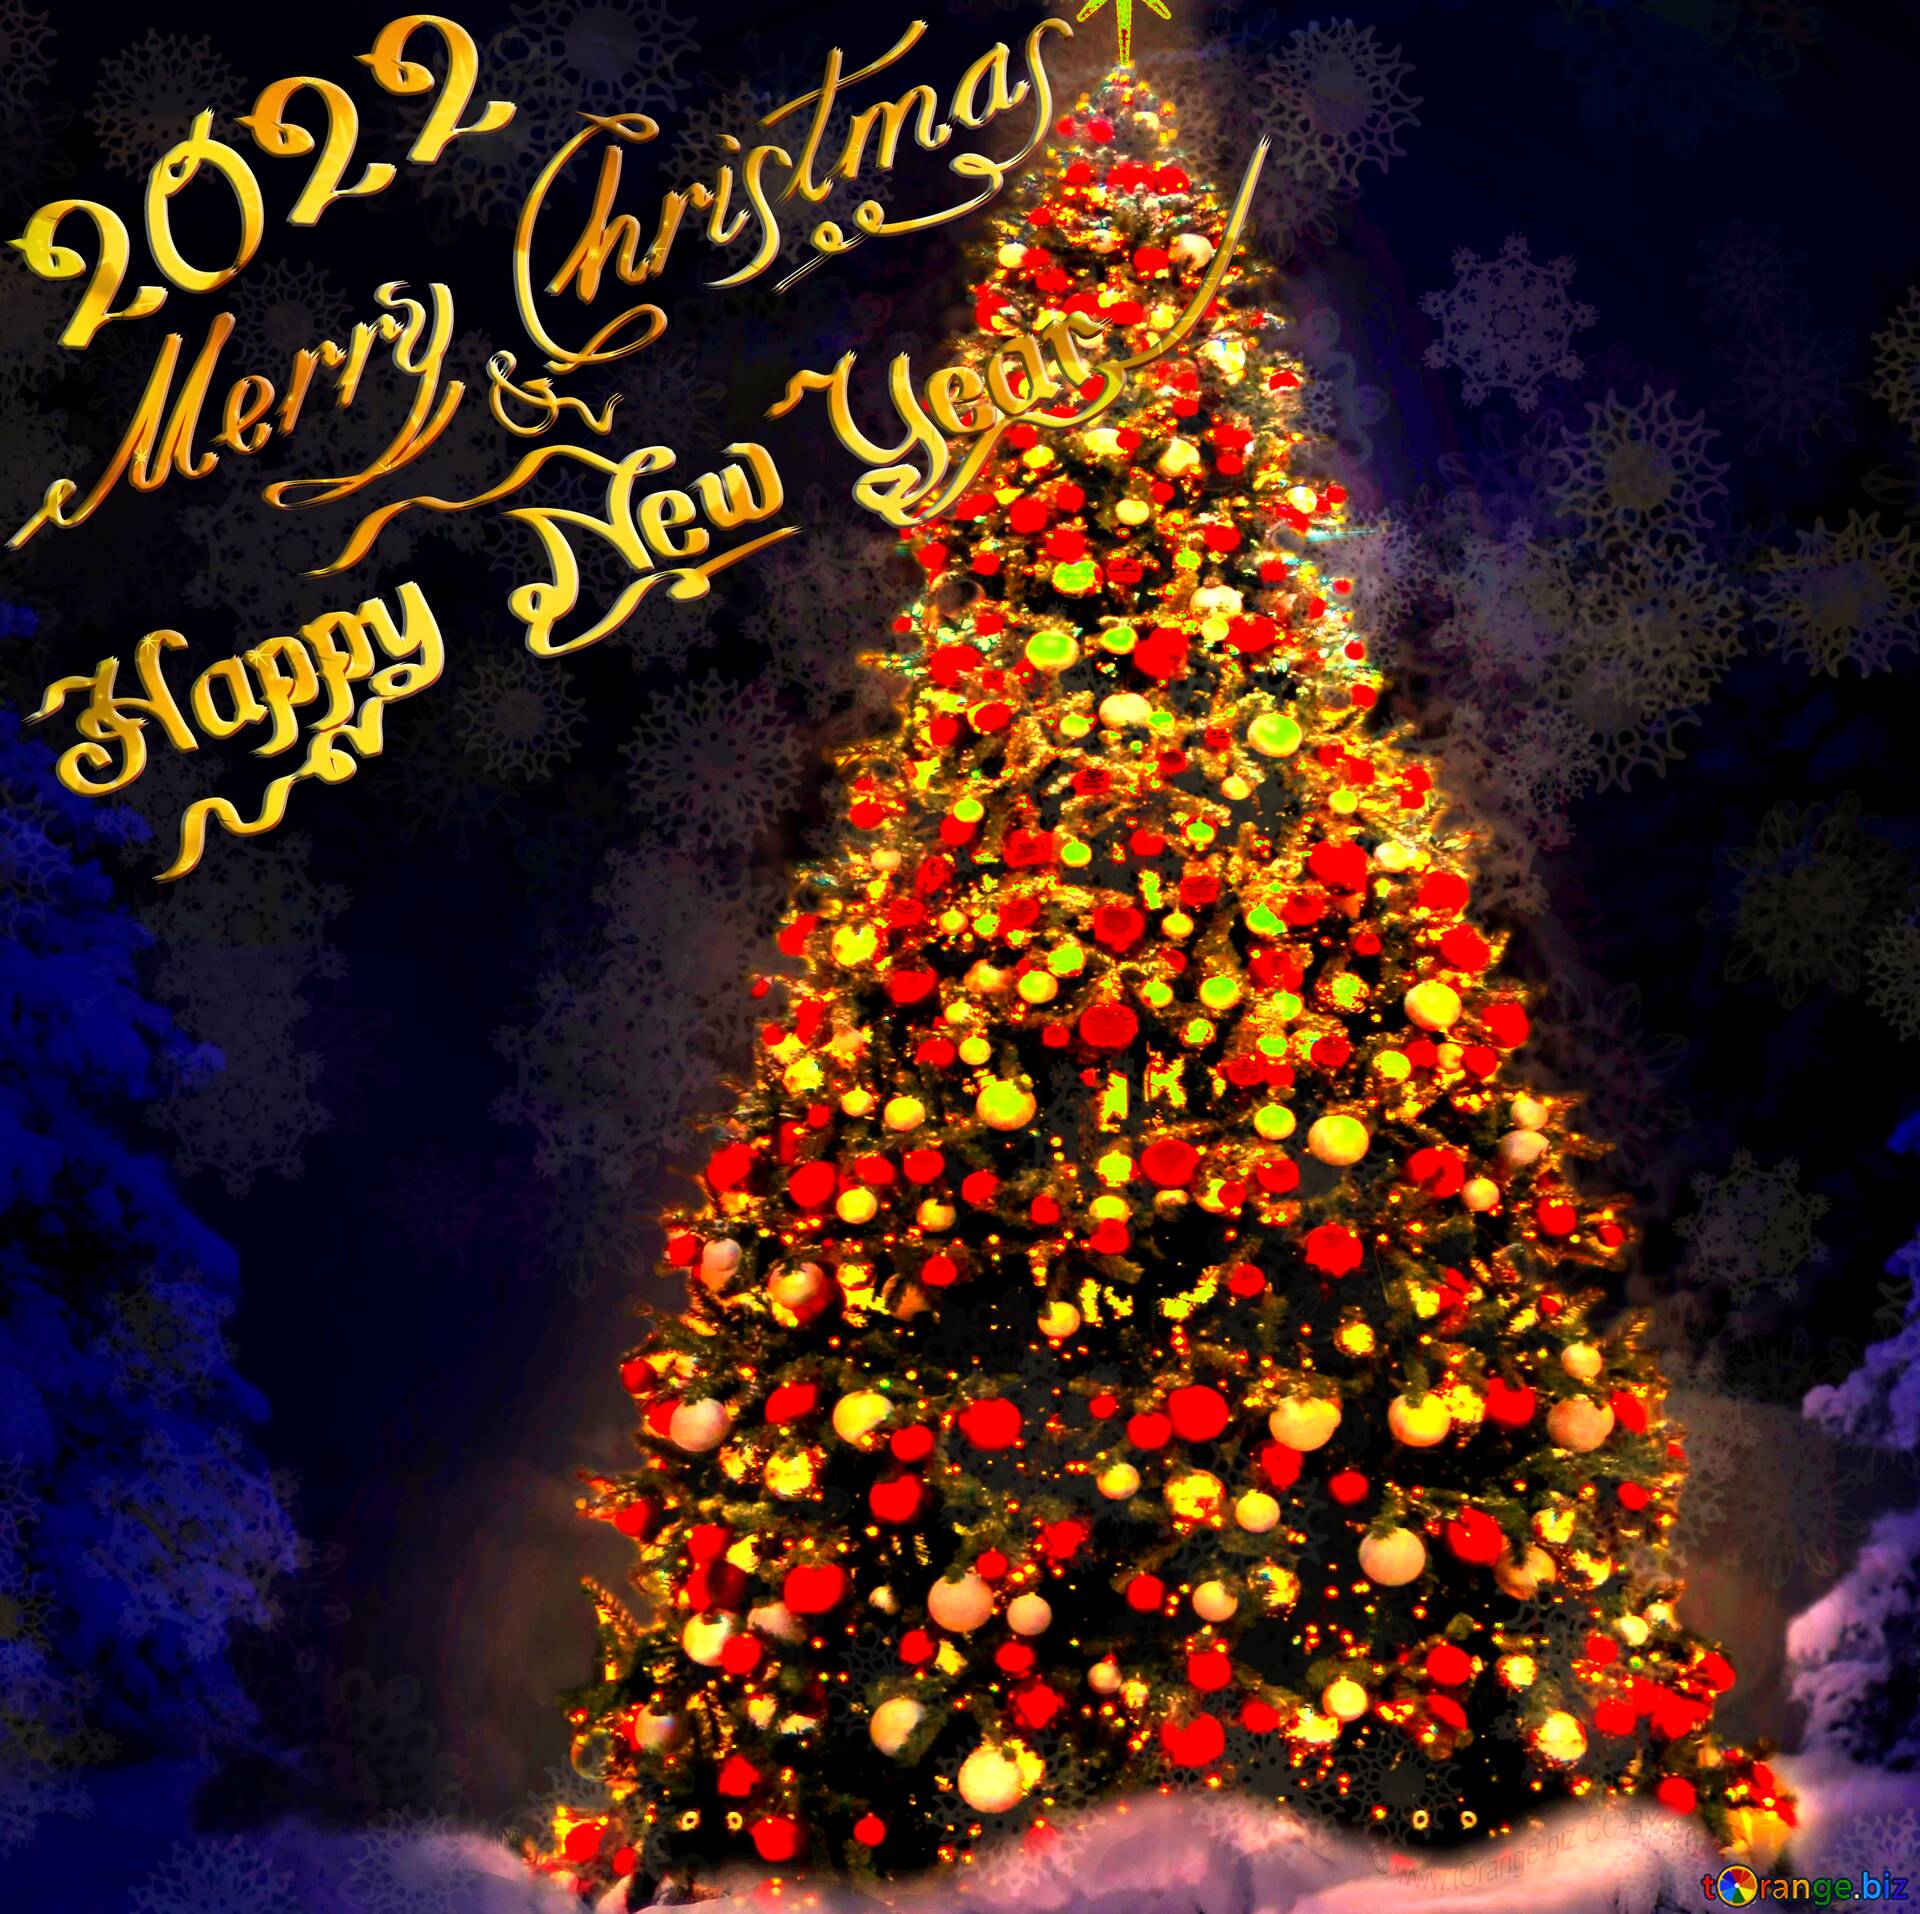 Download picture 2022 Merry Christmas on CC BY License 1920x1914